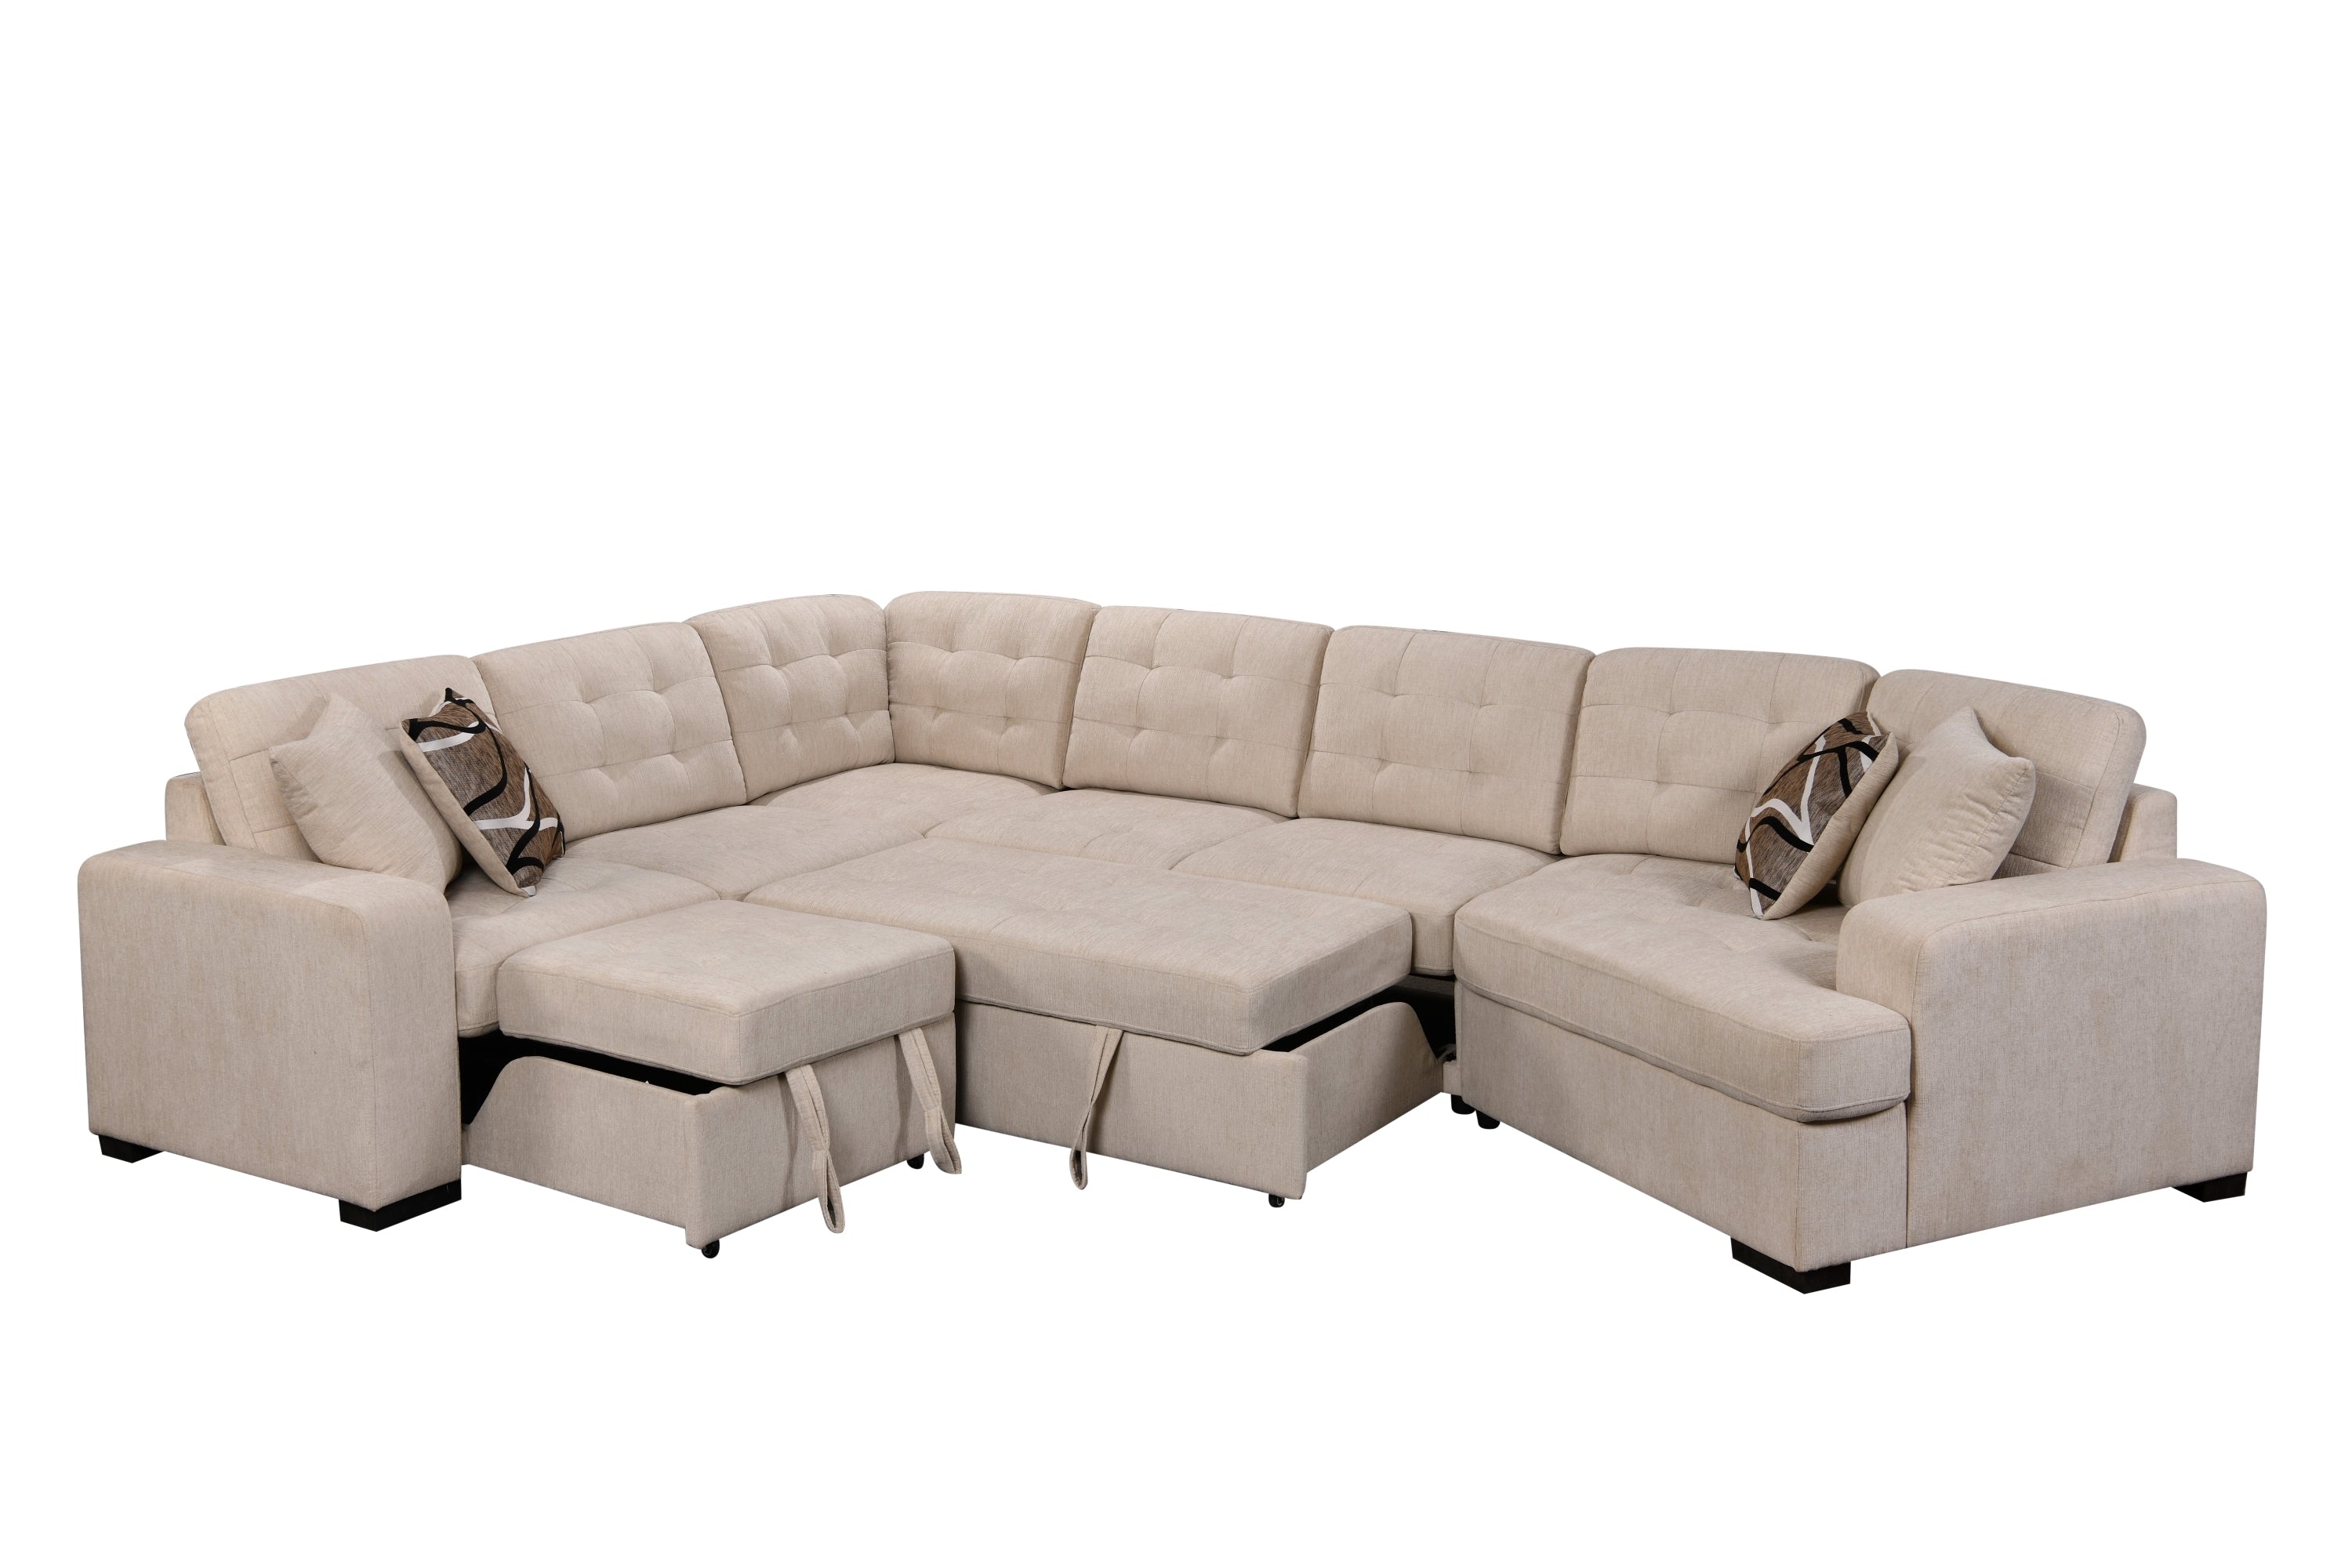 149" Oversized Sectional Modern Large Upholstered U-Shape Sectional Sofa, Extra Wide Chaise Lounge Couch for Home, Bedroom, Apartment, Dorm, Office, Beige